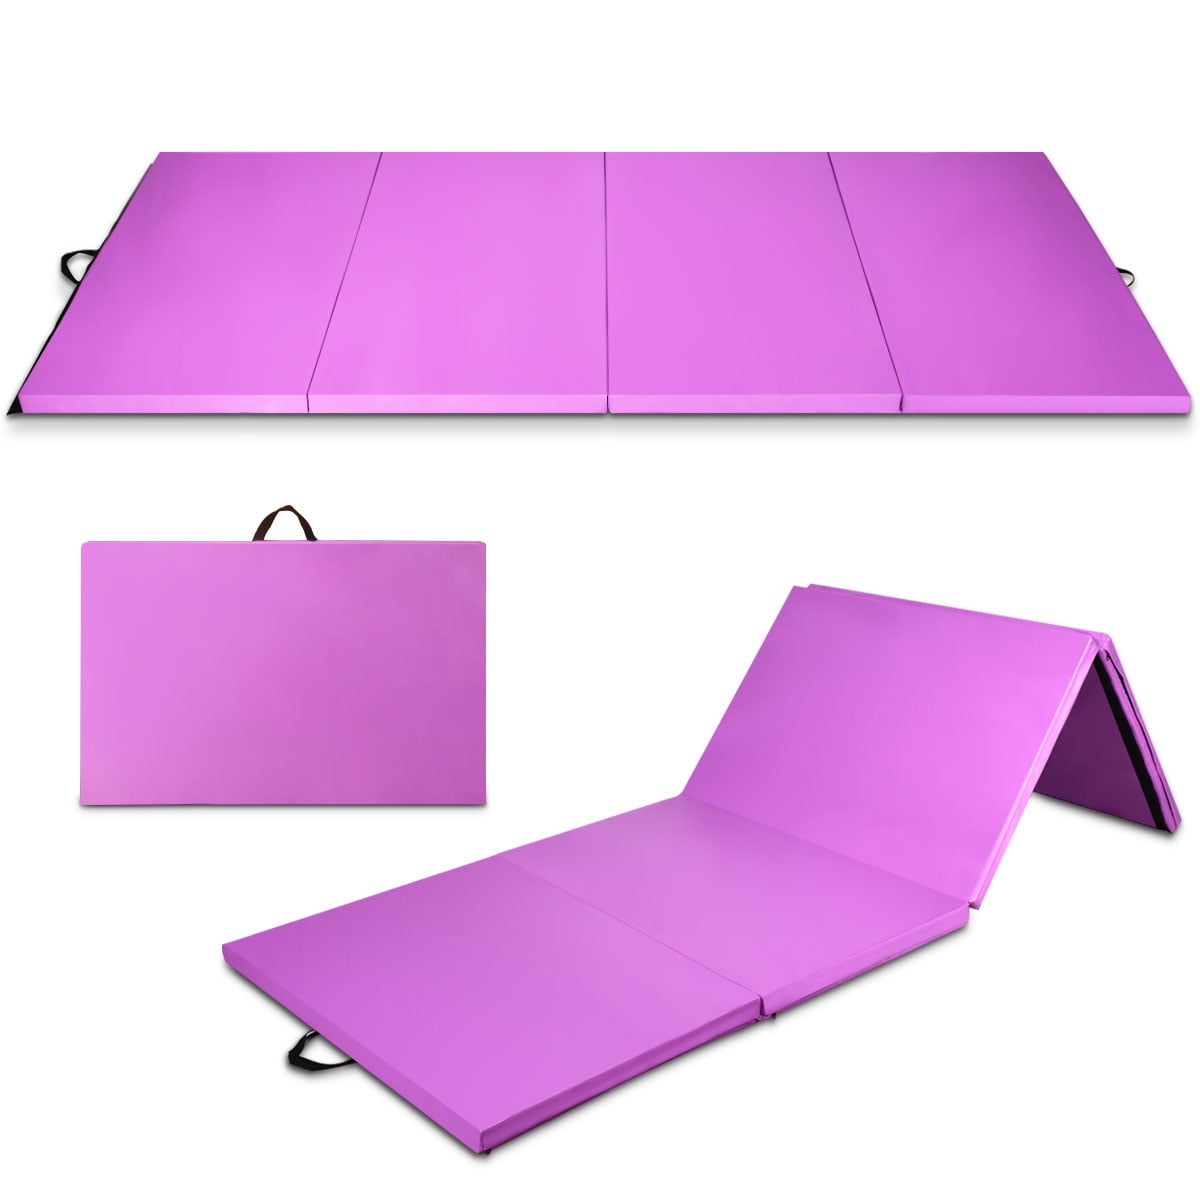 Tumbling Yoga Use Best Choice Products Folding Panel Exercise Gym Mat w/Handles for Gymnastics 10 x 4 x 2 